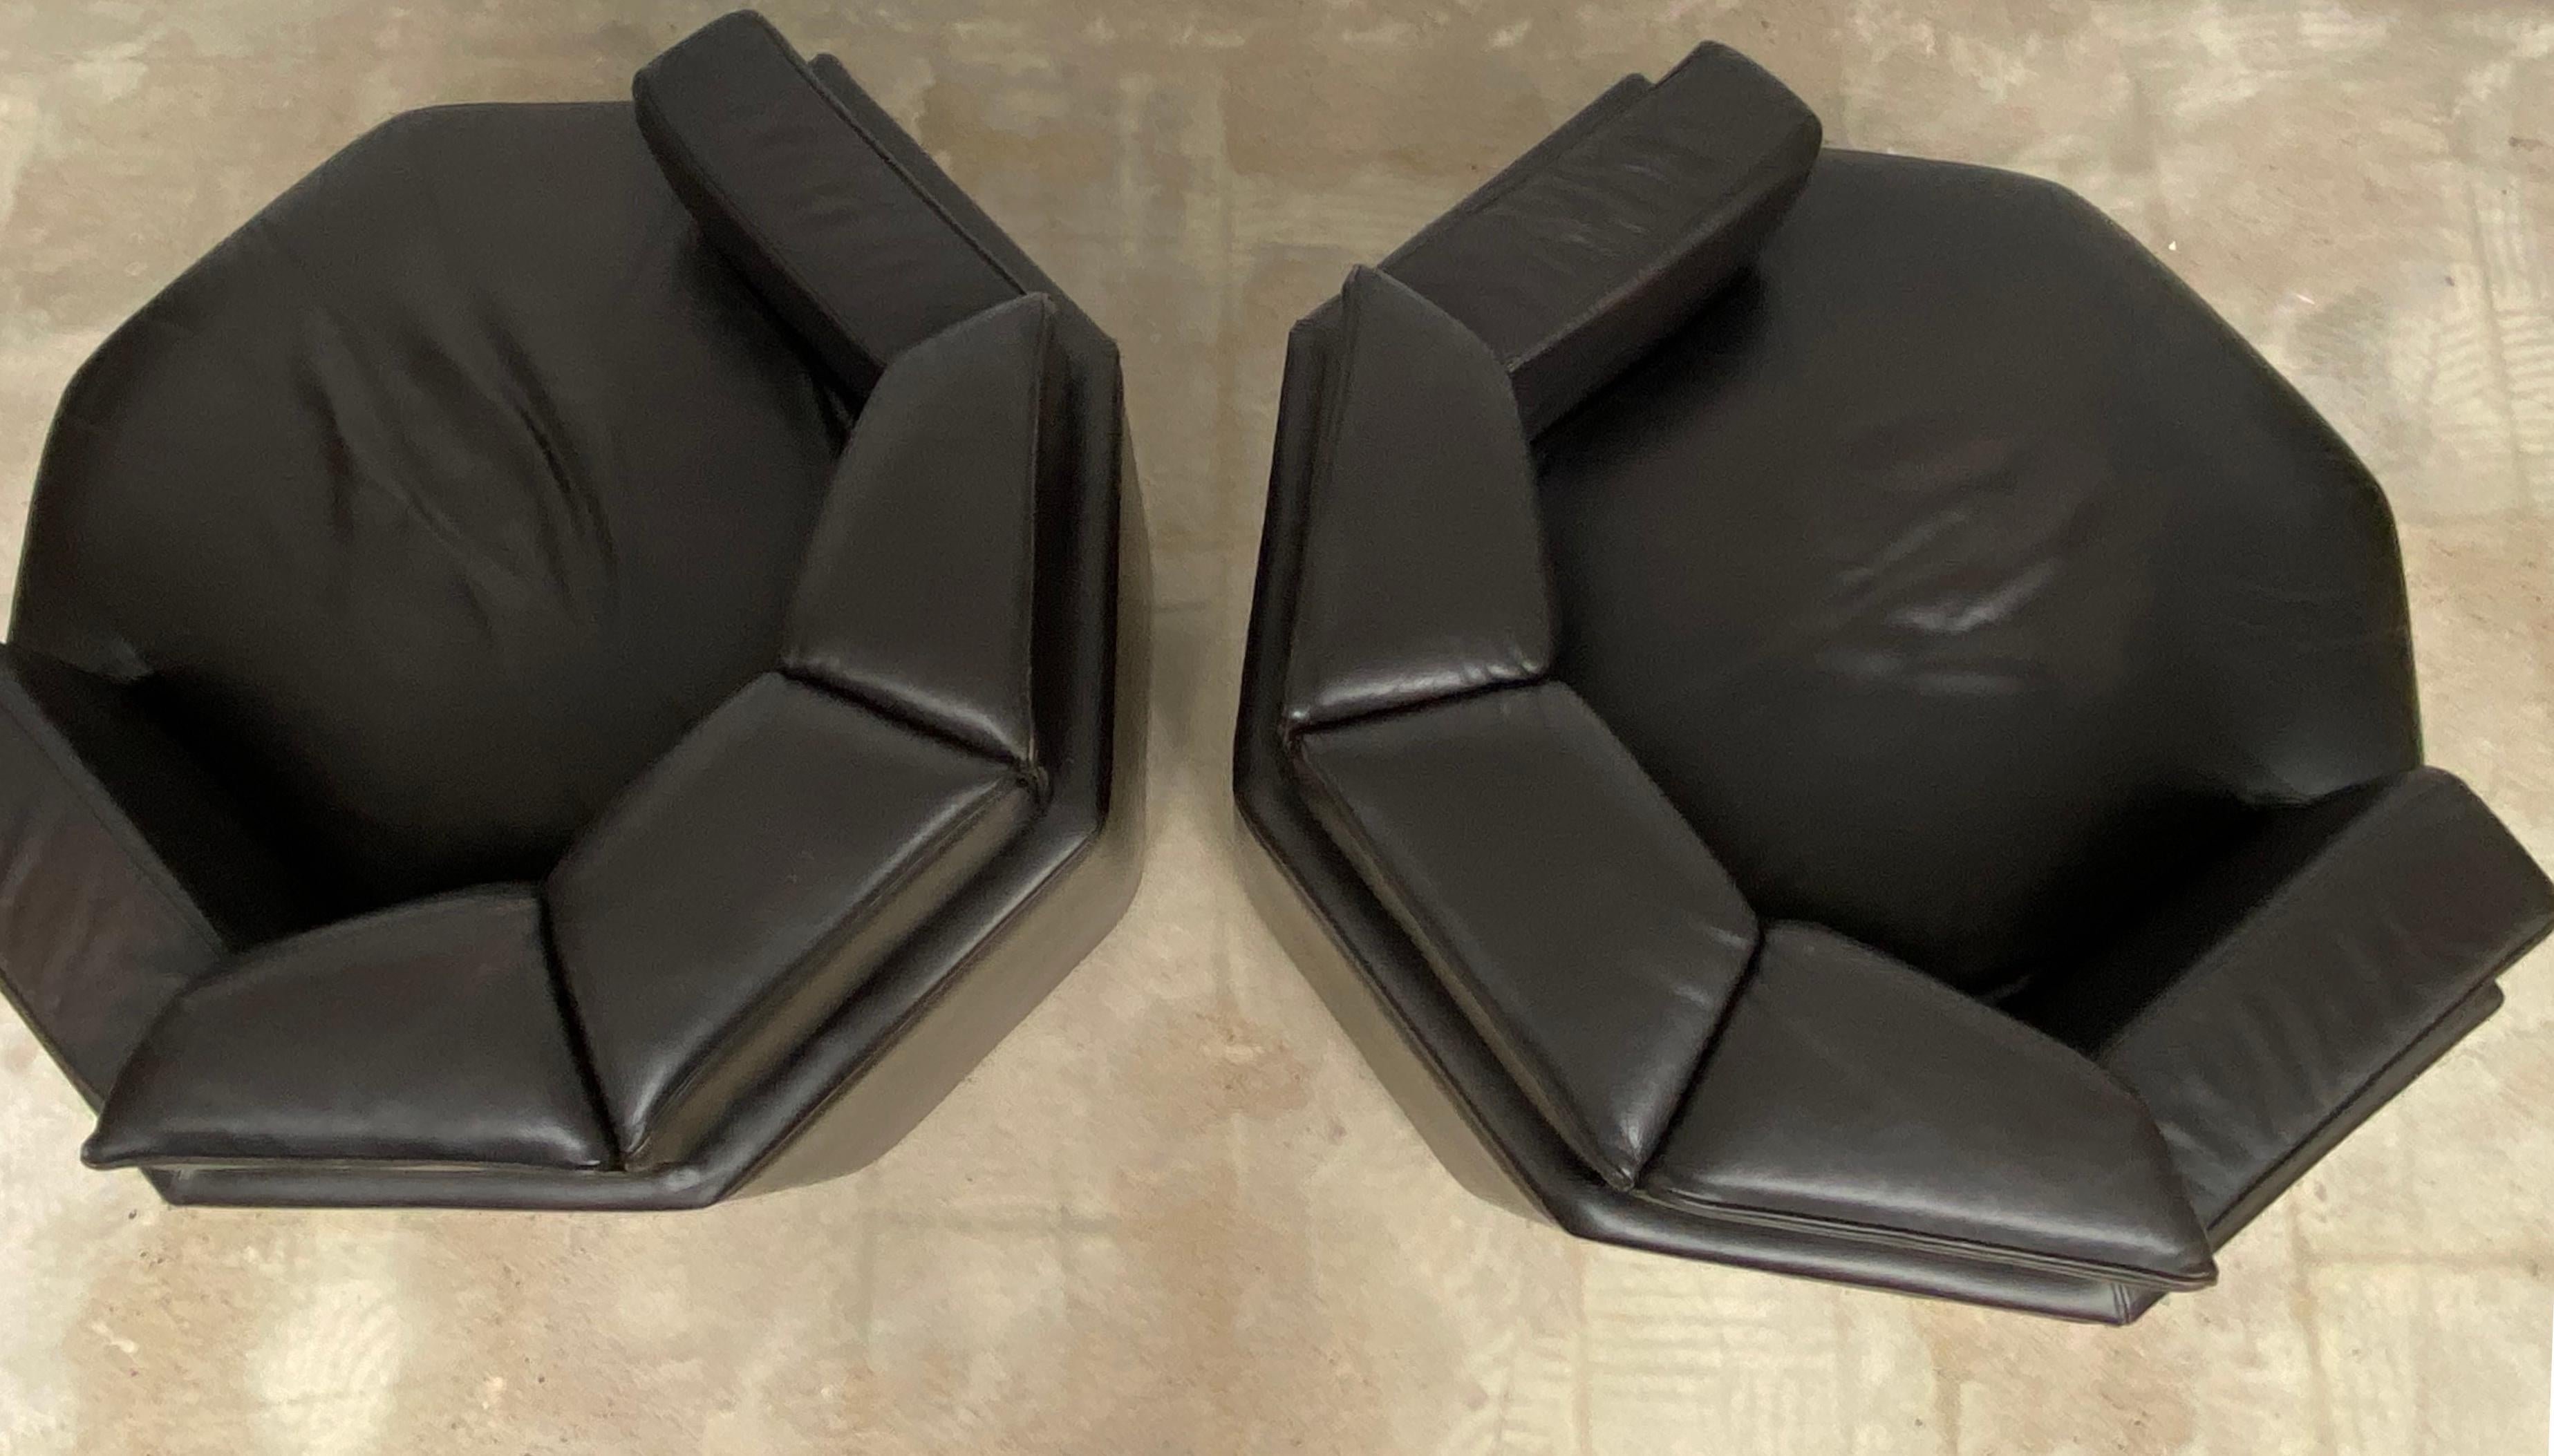 Brown octagonal solid club chairs. The original segmented way of reupholstery makes these club chair both rare and unique in style and very comfortable in use. These uniquely shaped club chairs would very well suit an early 1970s James bond film